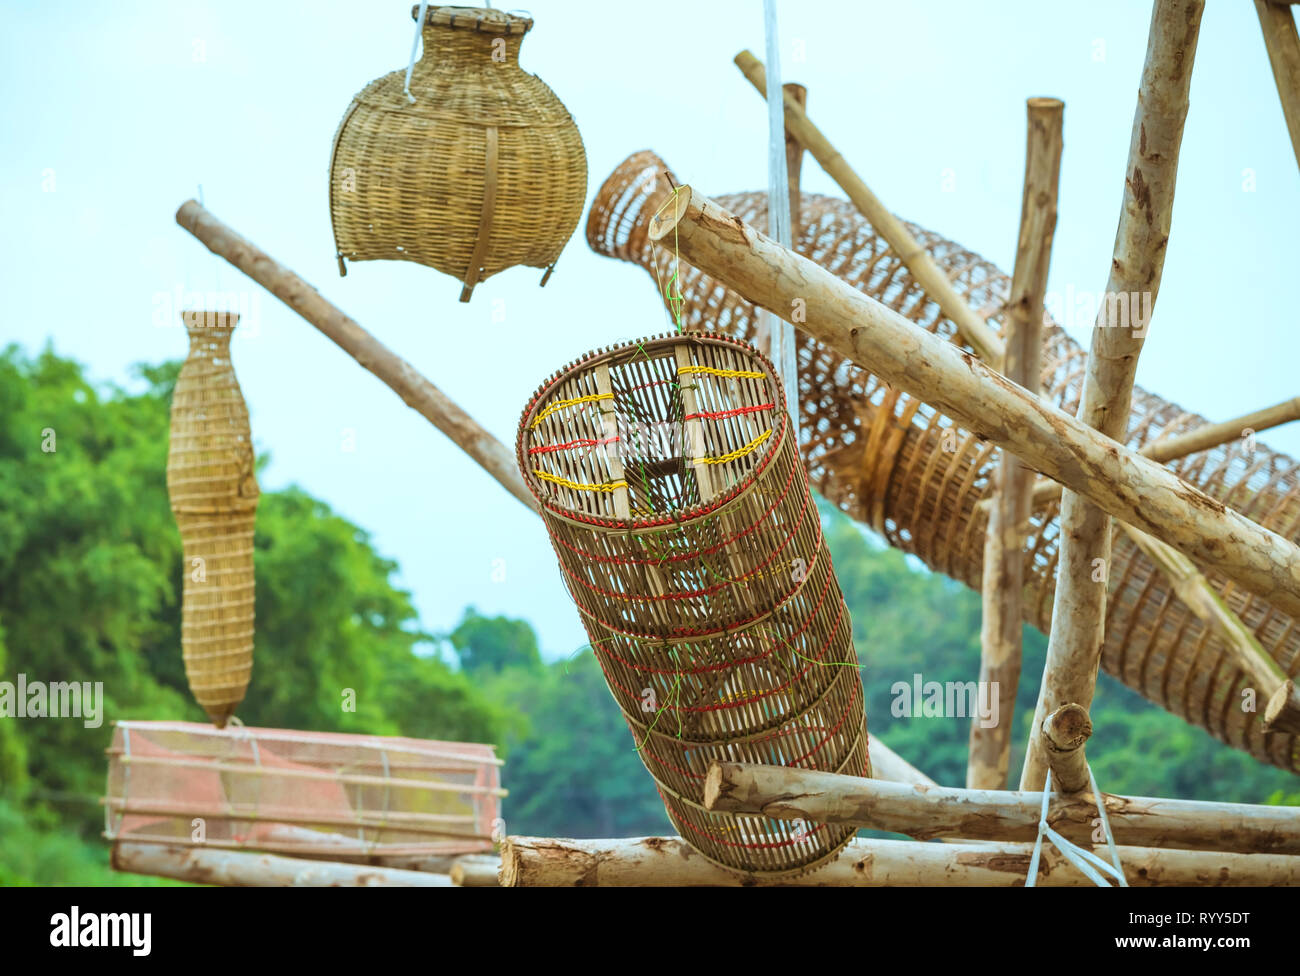 https://c8.alamy.com/comp/RYY5DT/ancient-bamboo-fish-trap-equipment-of-countryside-thailand-RYY5DT.jpg